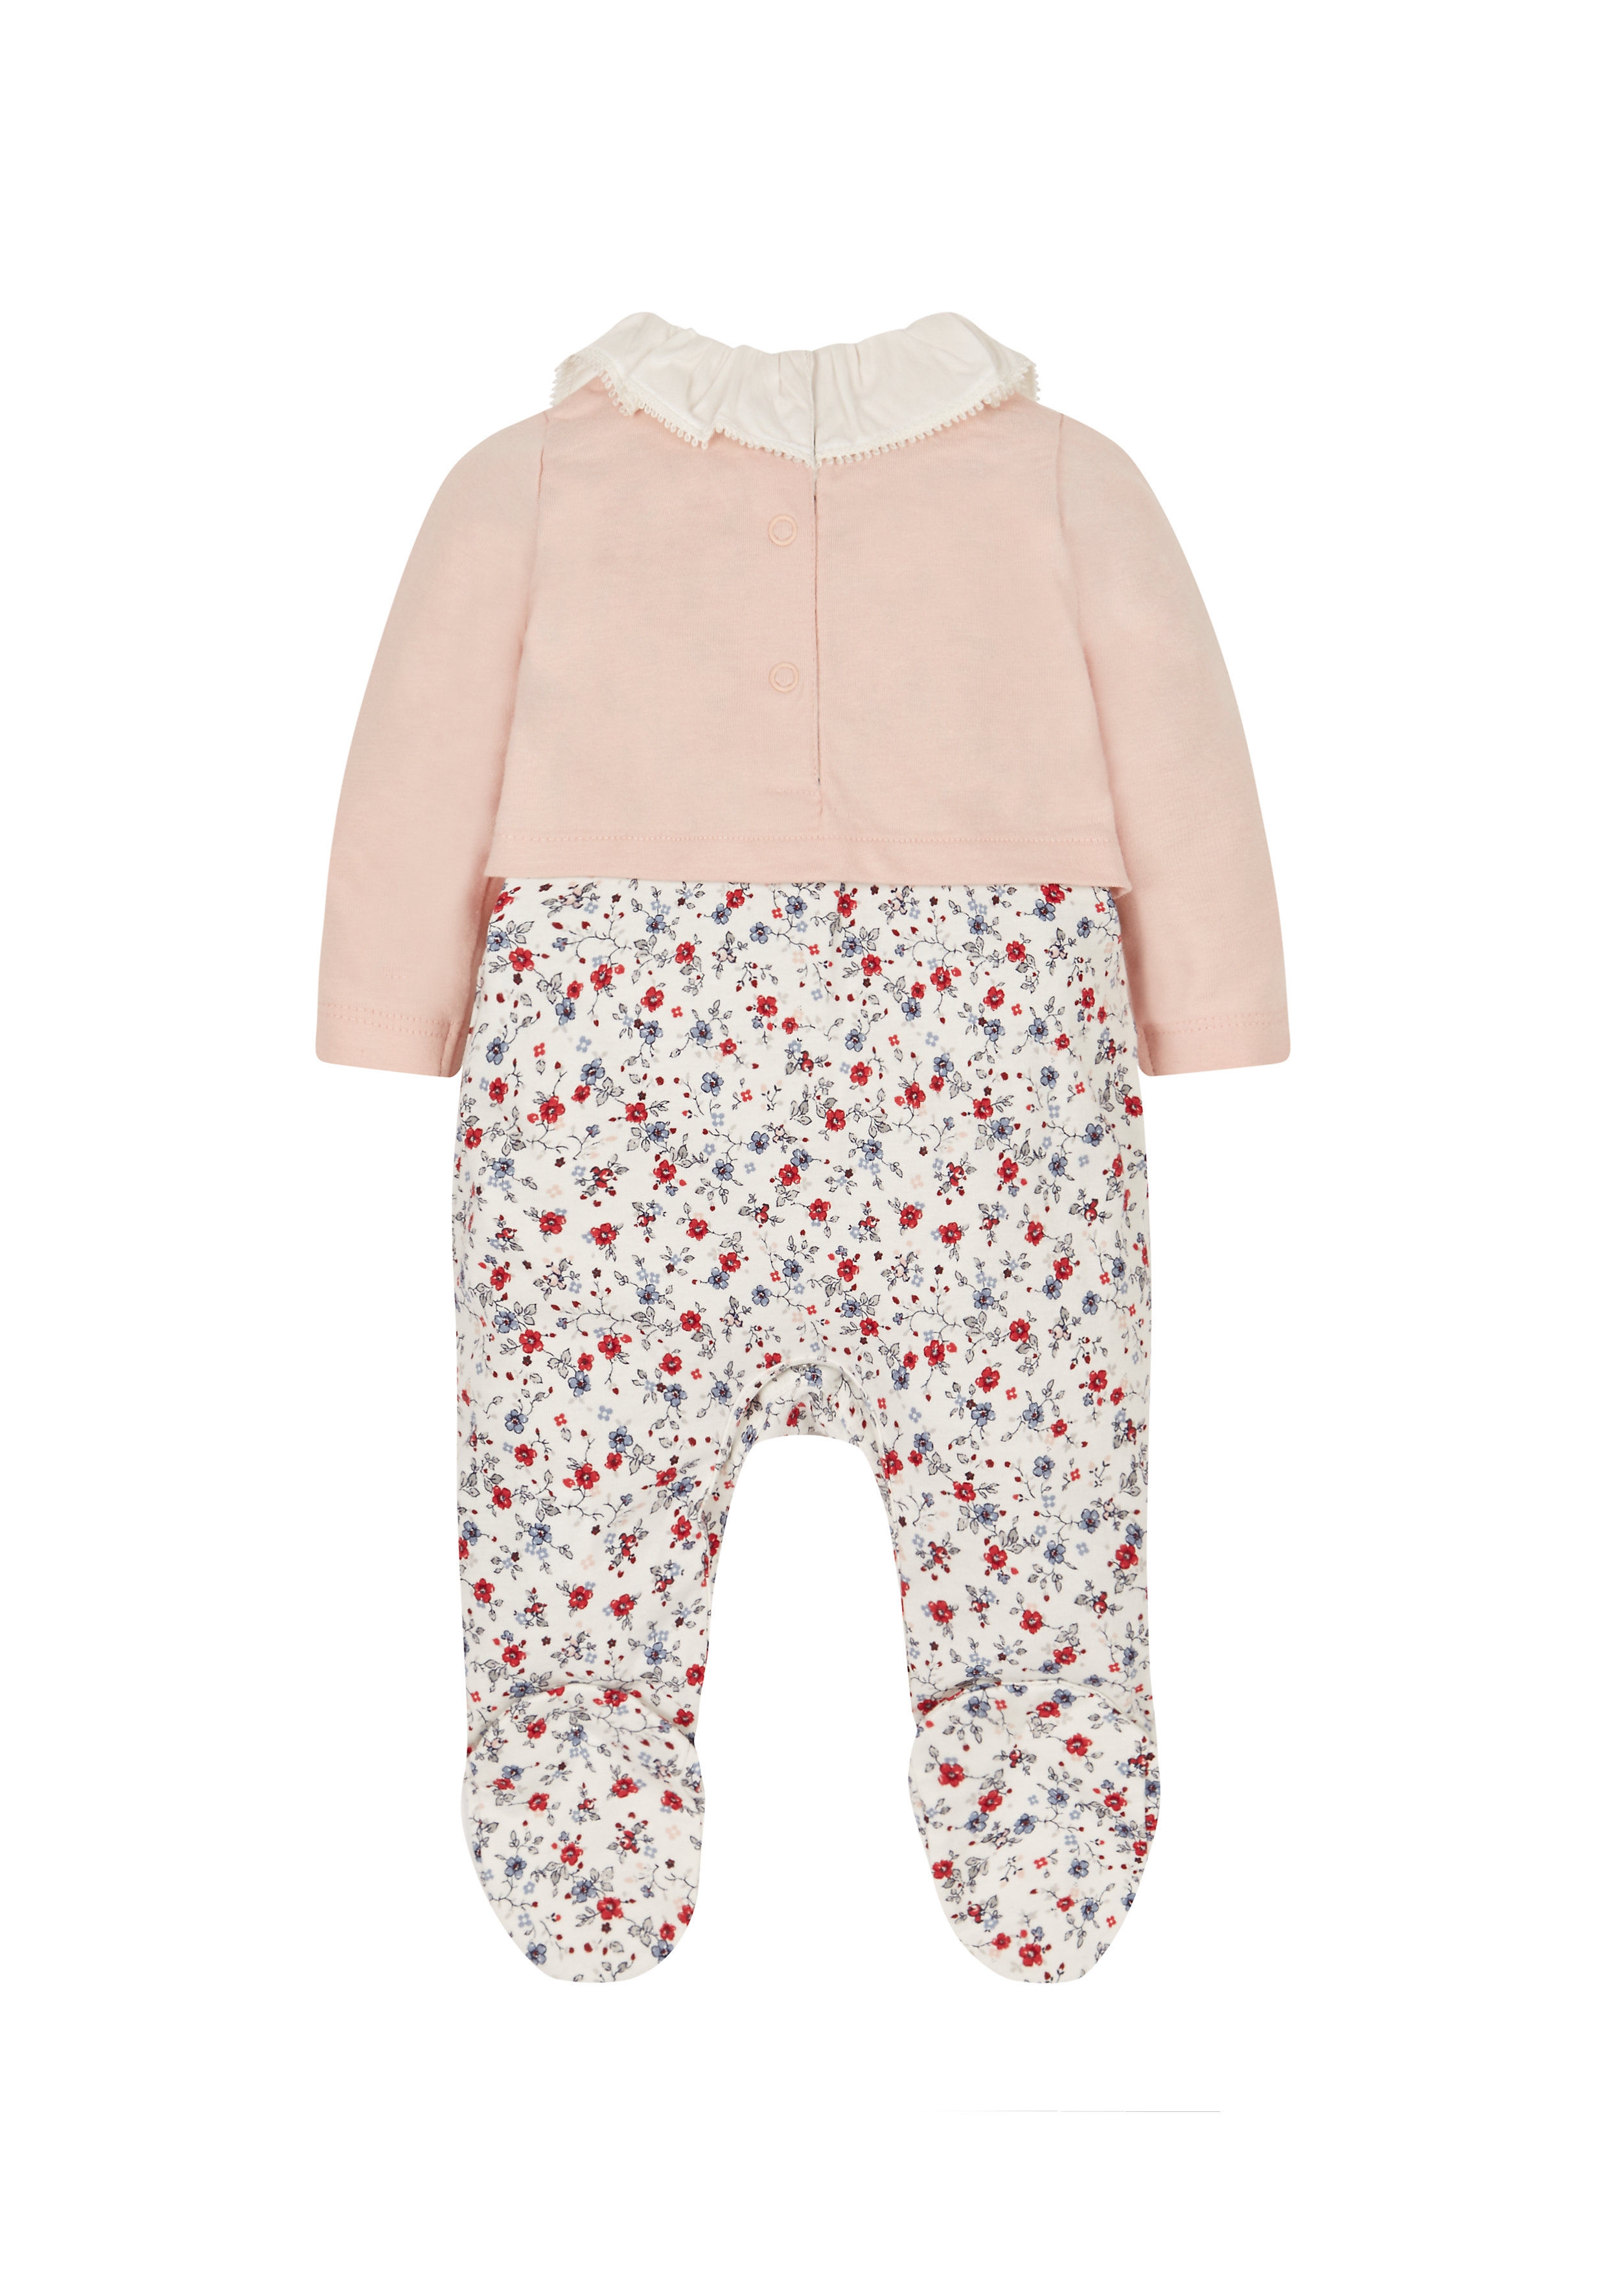 Mothercare | Girls Full Sleeves Romper Floral Print - Multicolor 1